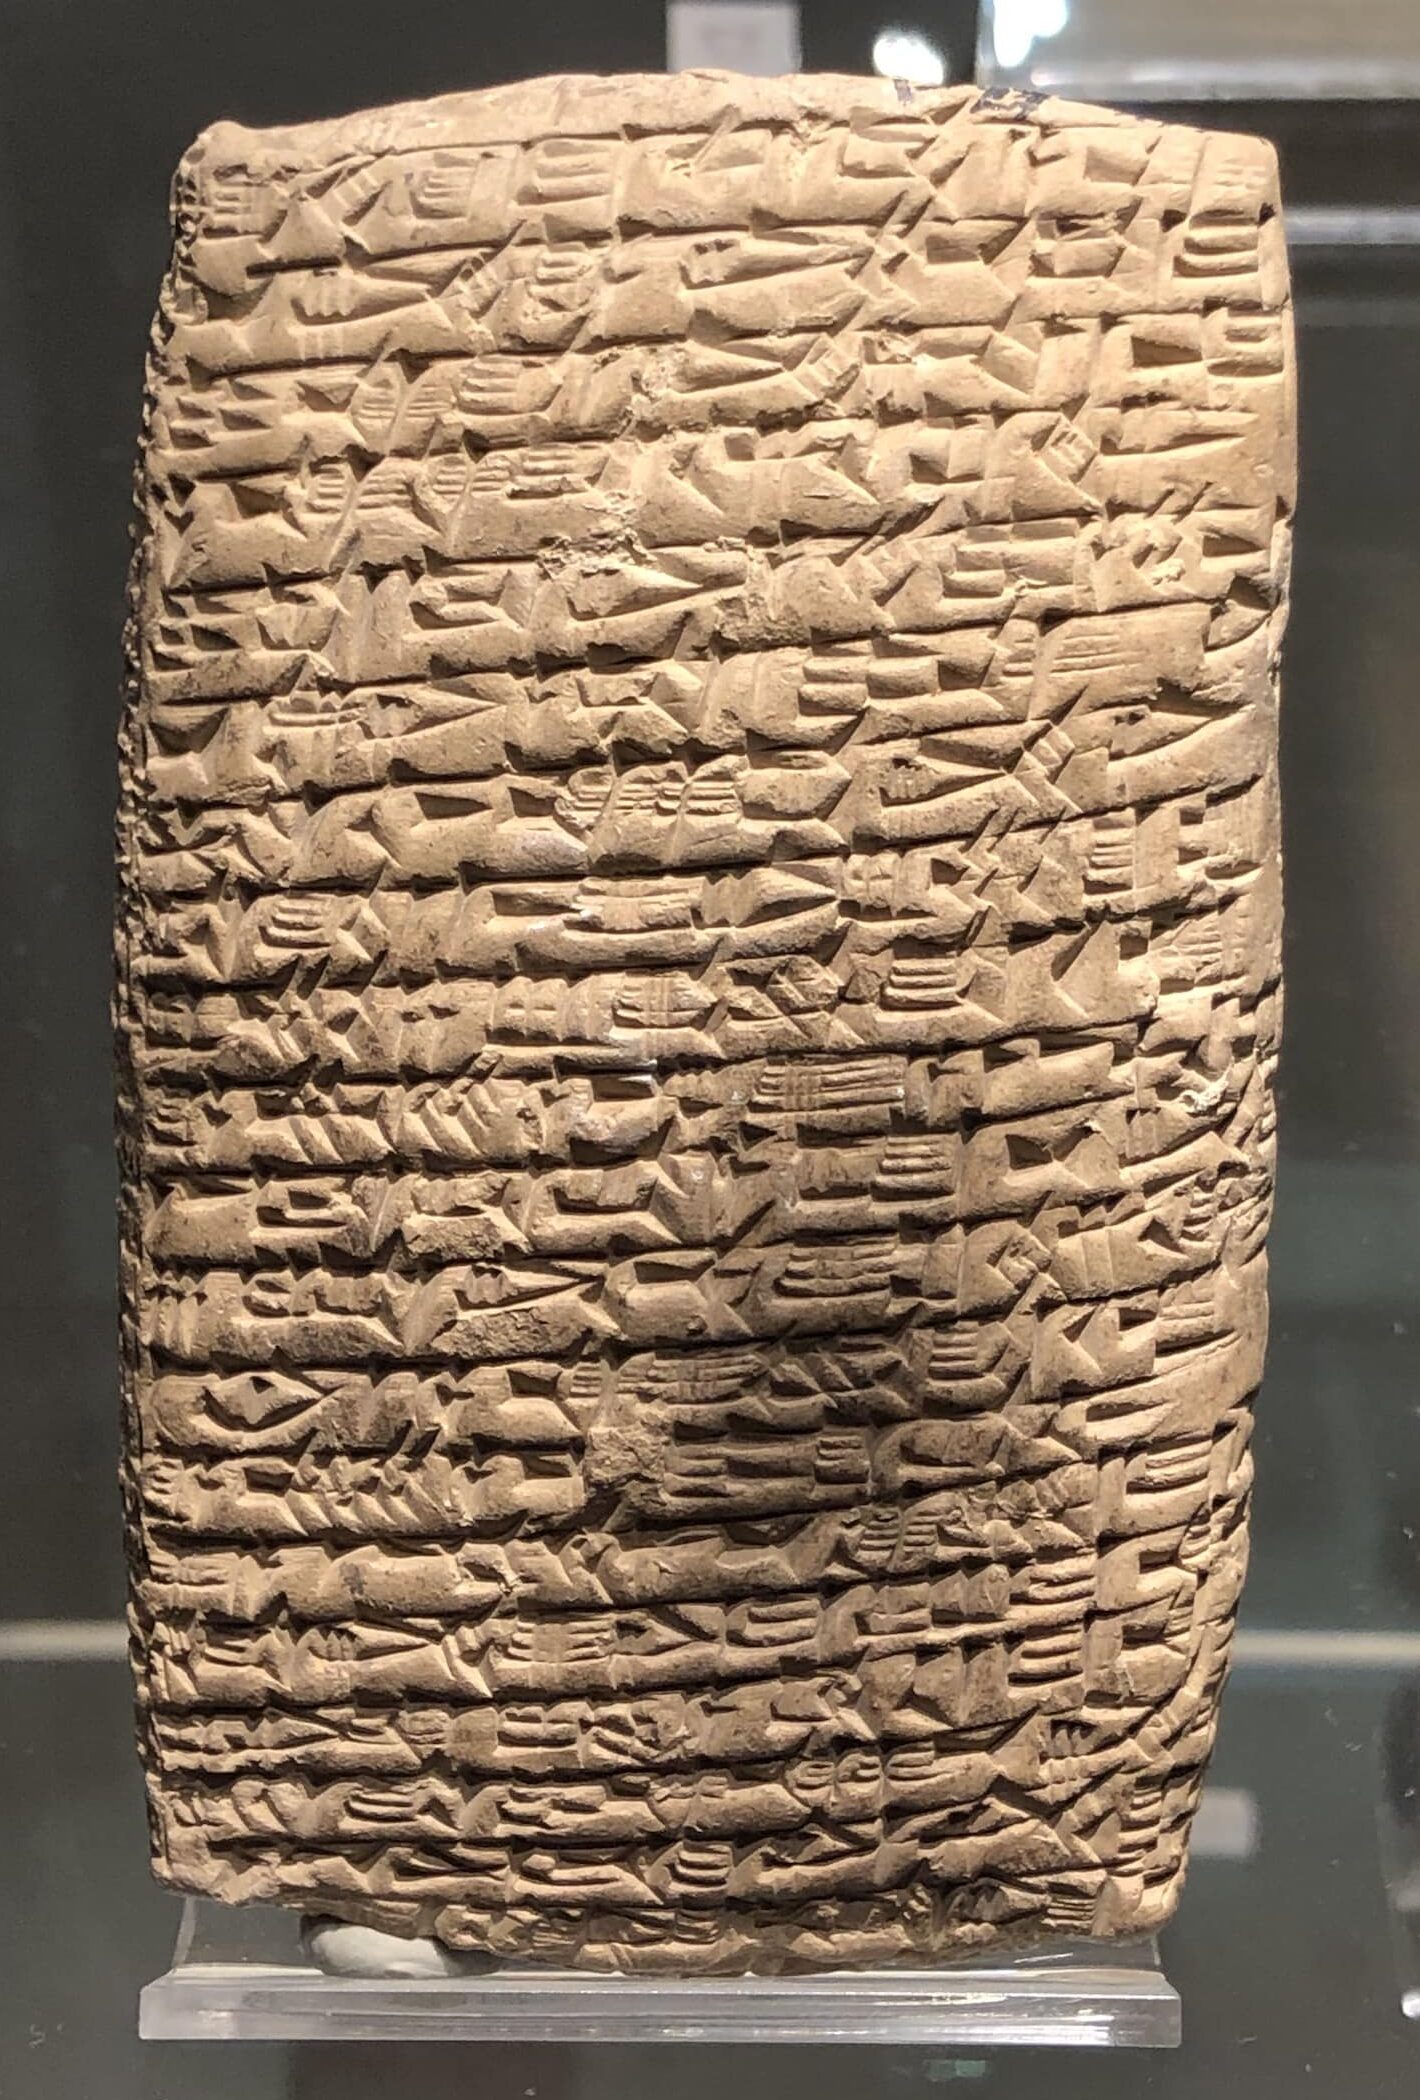 Clay tablet inscribed with Assyrian cuneiform